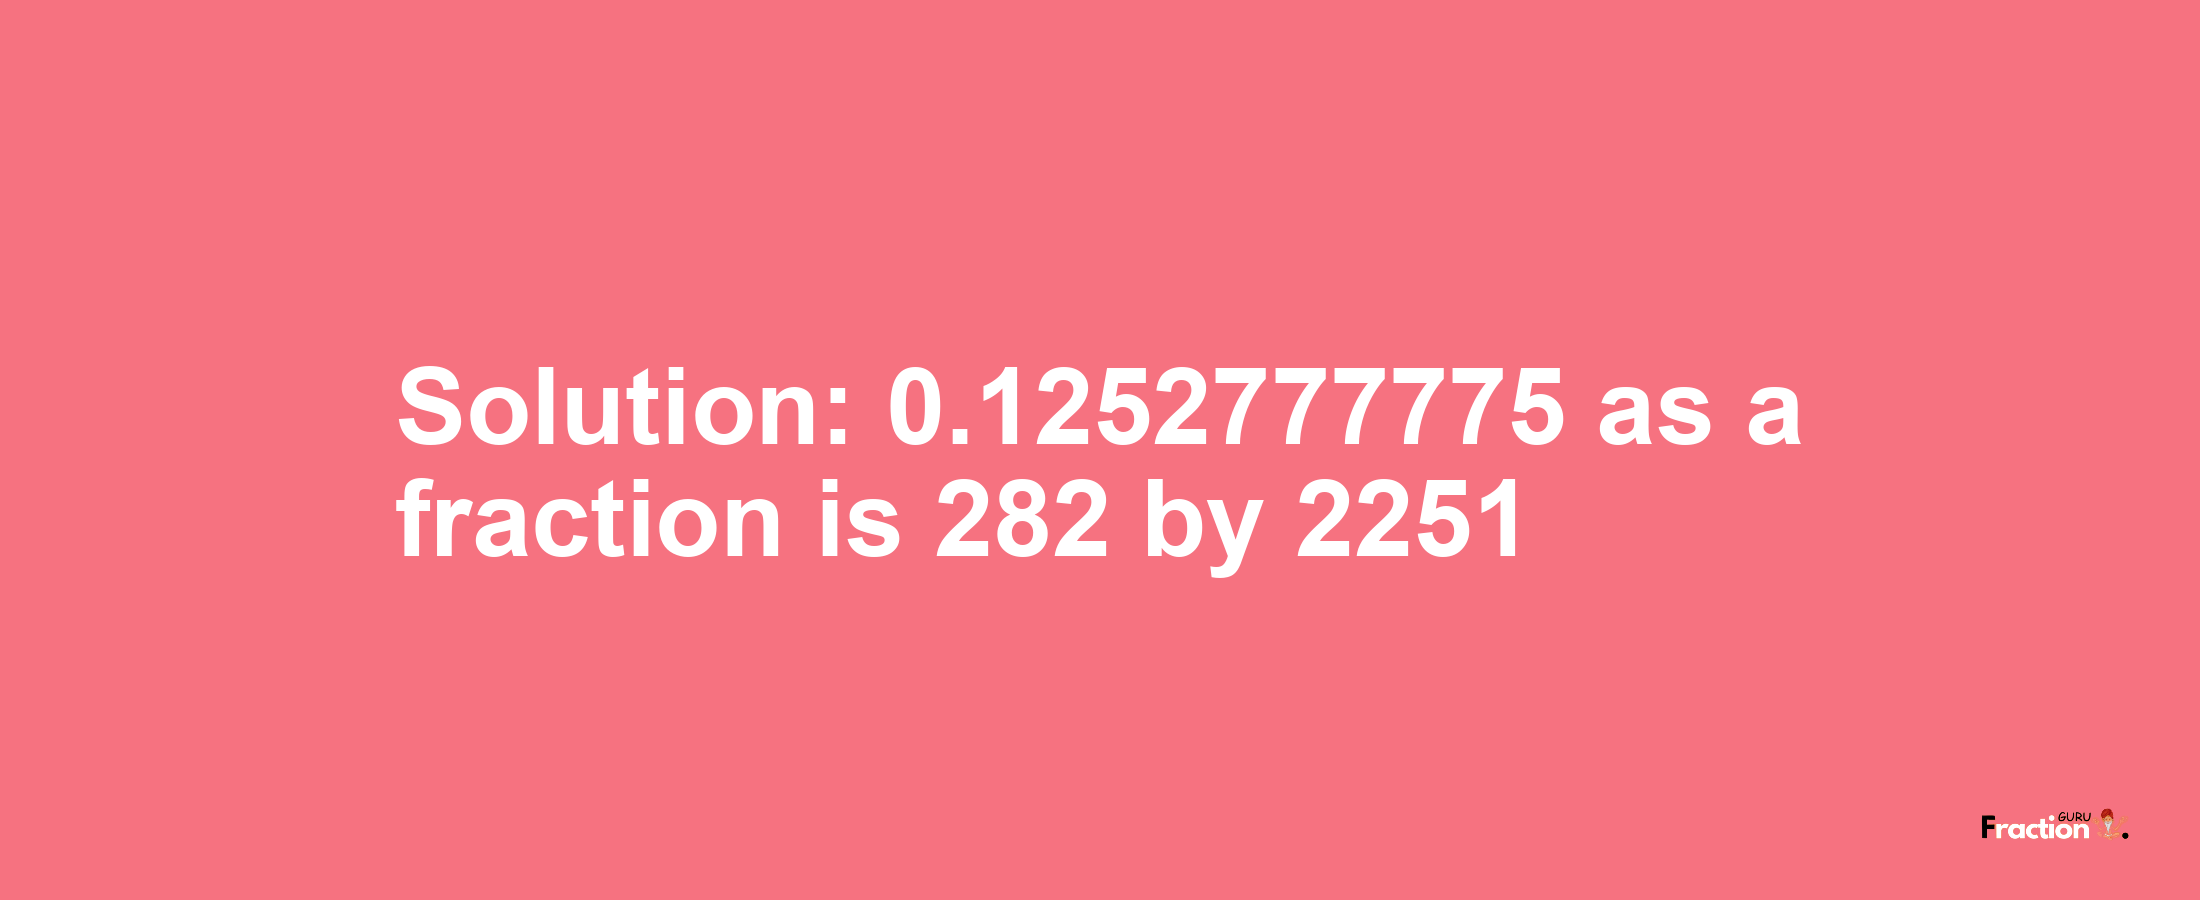 Solution:0.1252777775 as a fraction is 282/2251